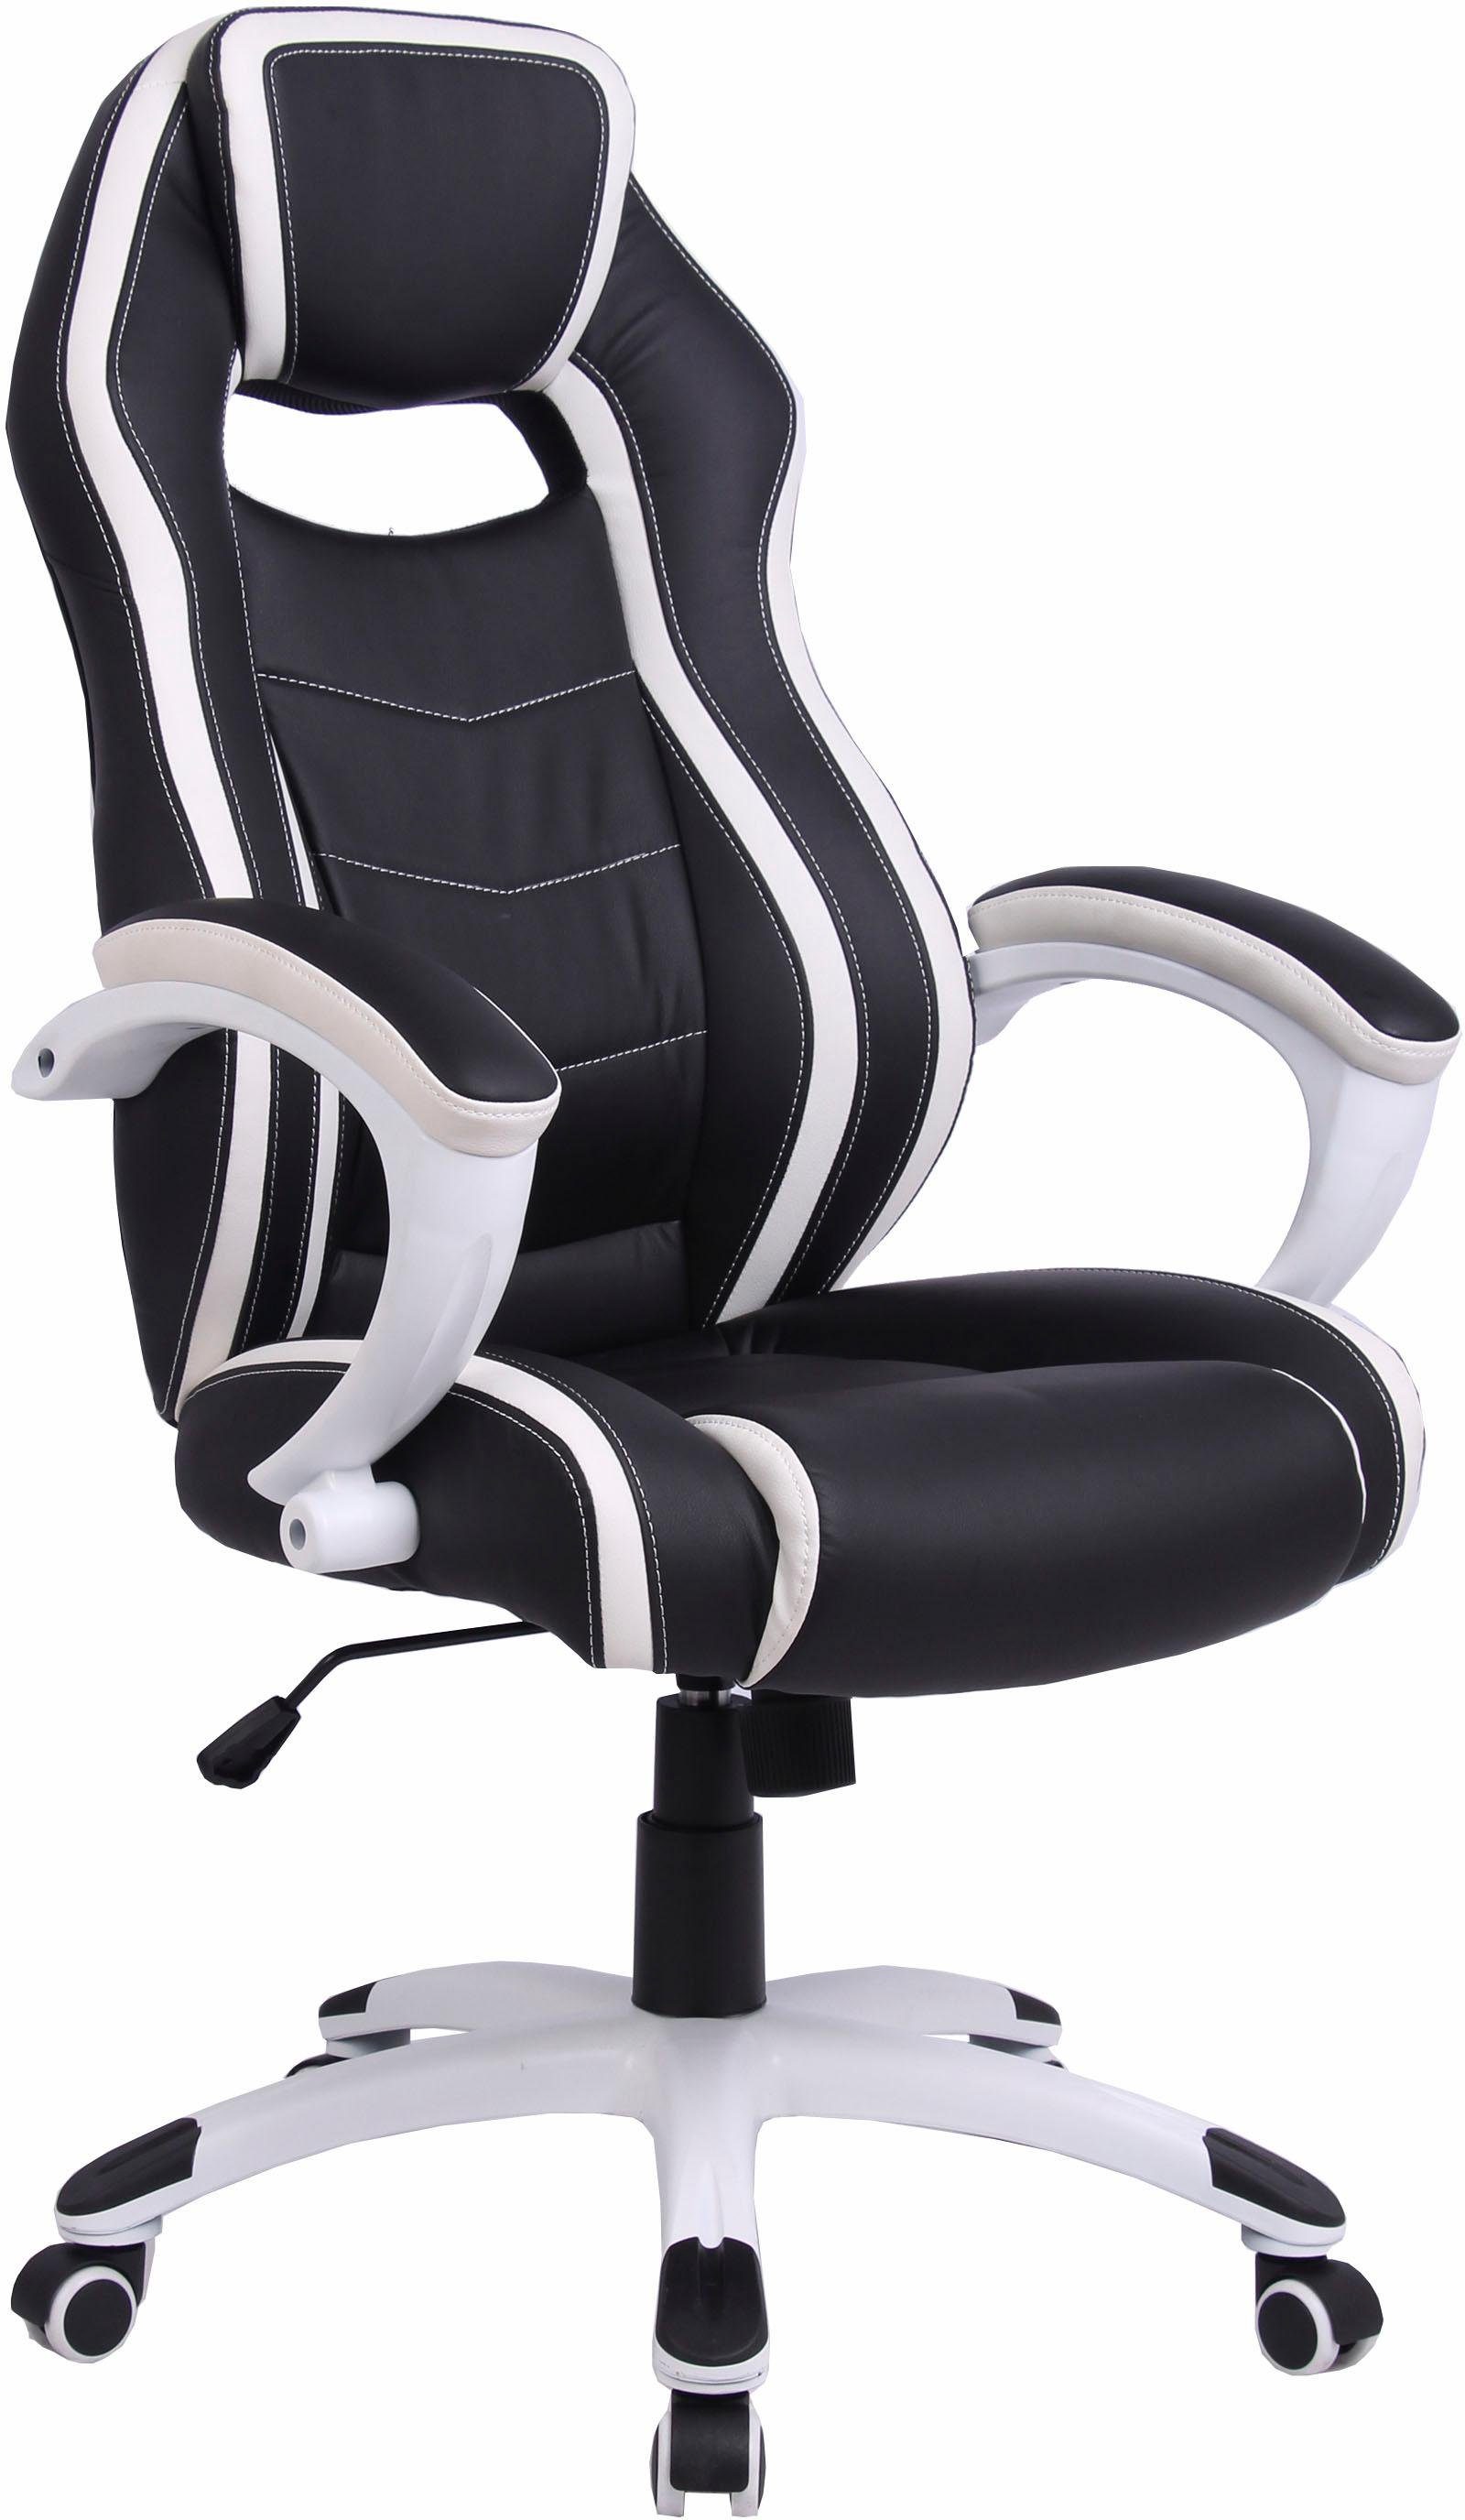 Silverstone" Homexperts Silverstone, Gaming-Stuhl "Homexperts Chefsessel